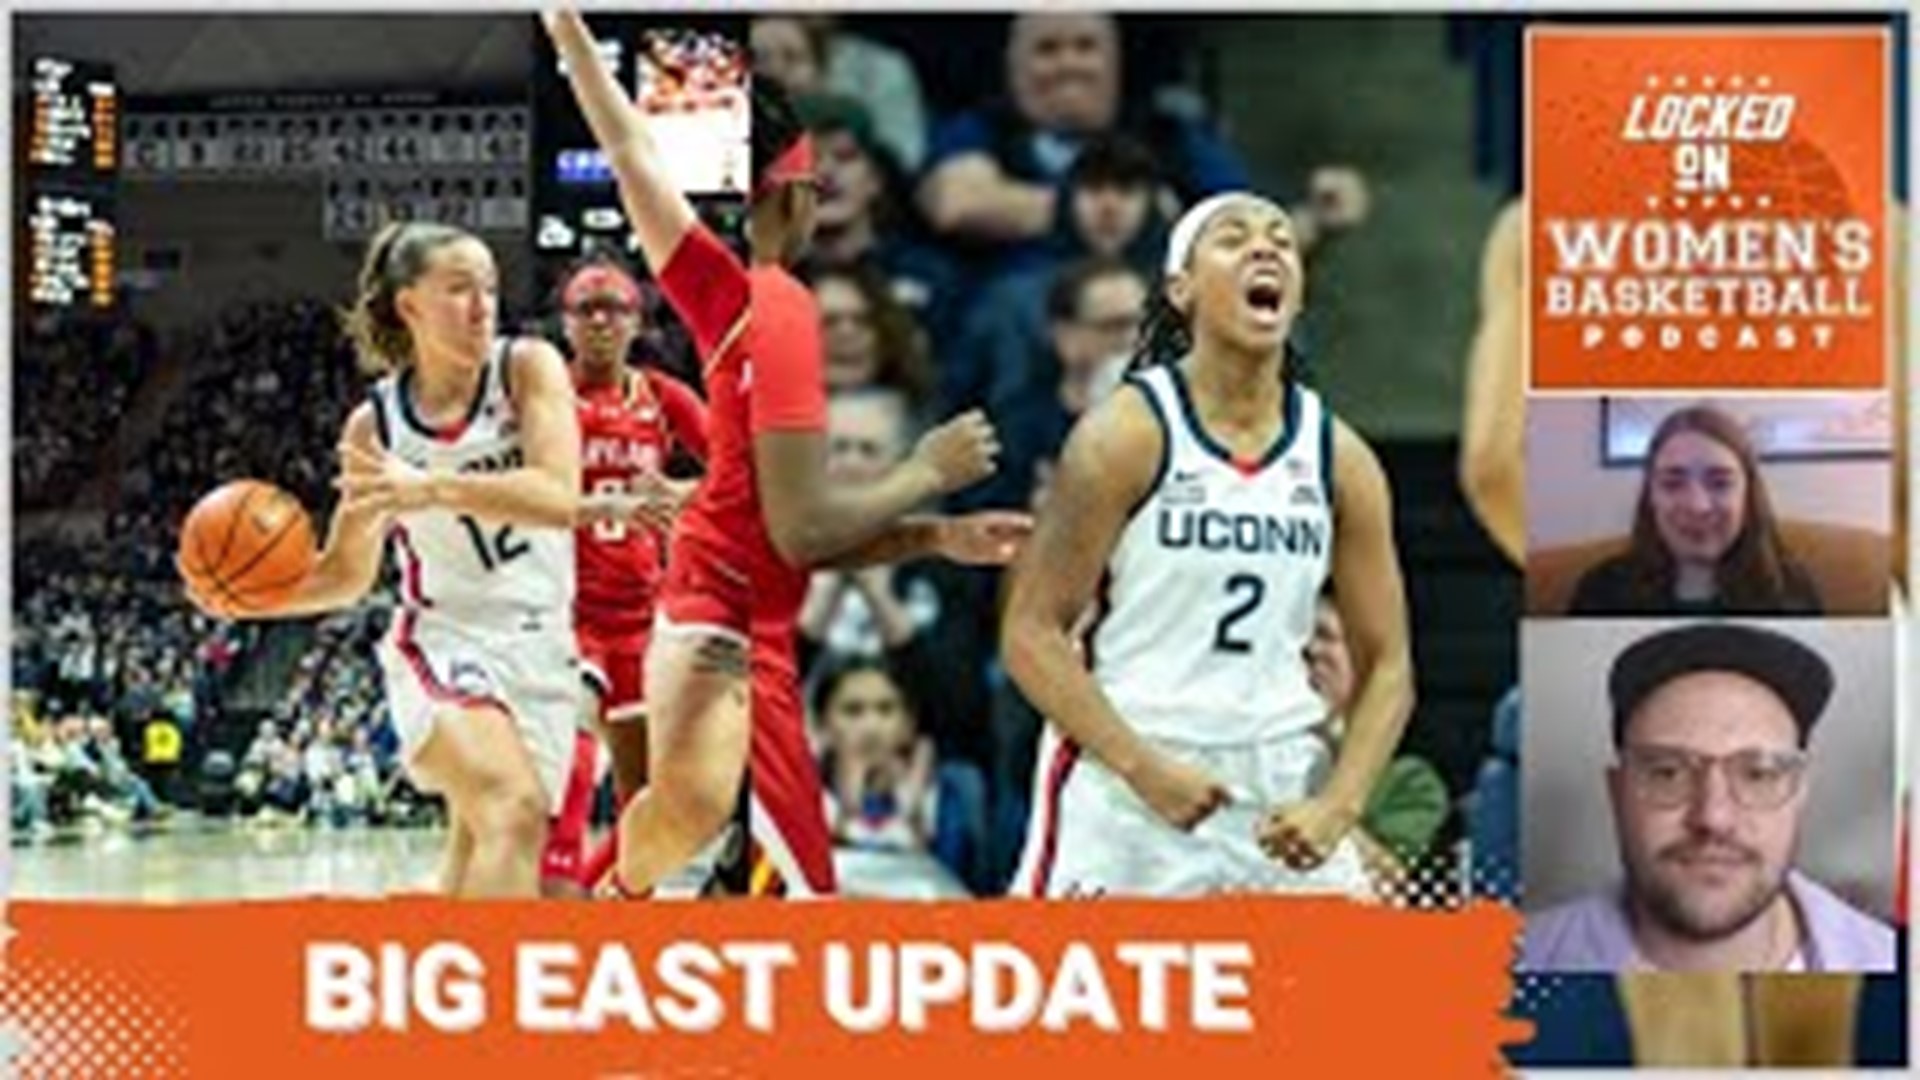 As BIG EAST play gets into full swing, BIG EAST beat writer Tee Baker joins host Natalie Heavren to discuss what’s new in the conference.